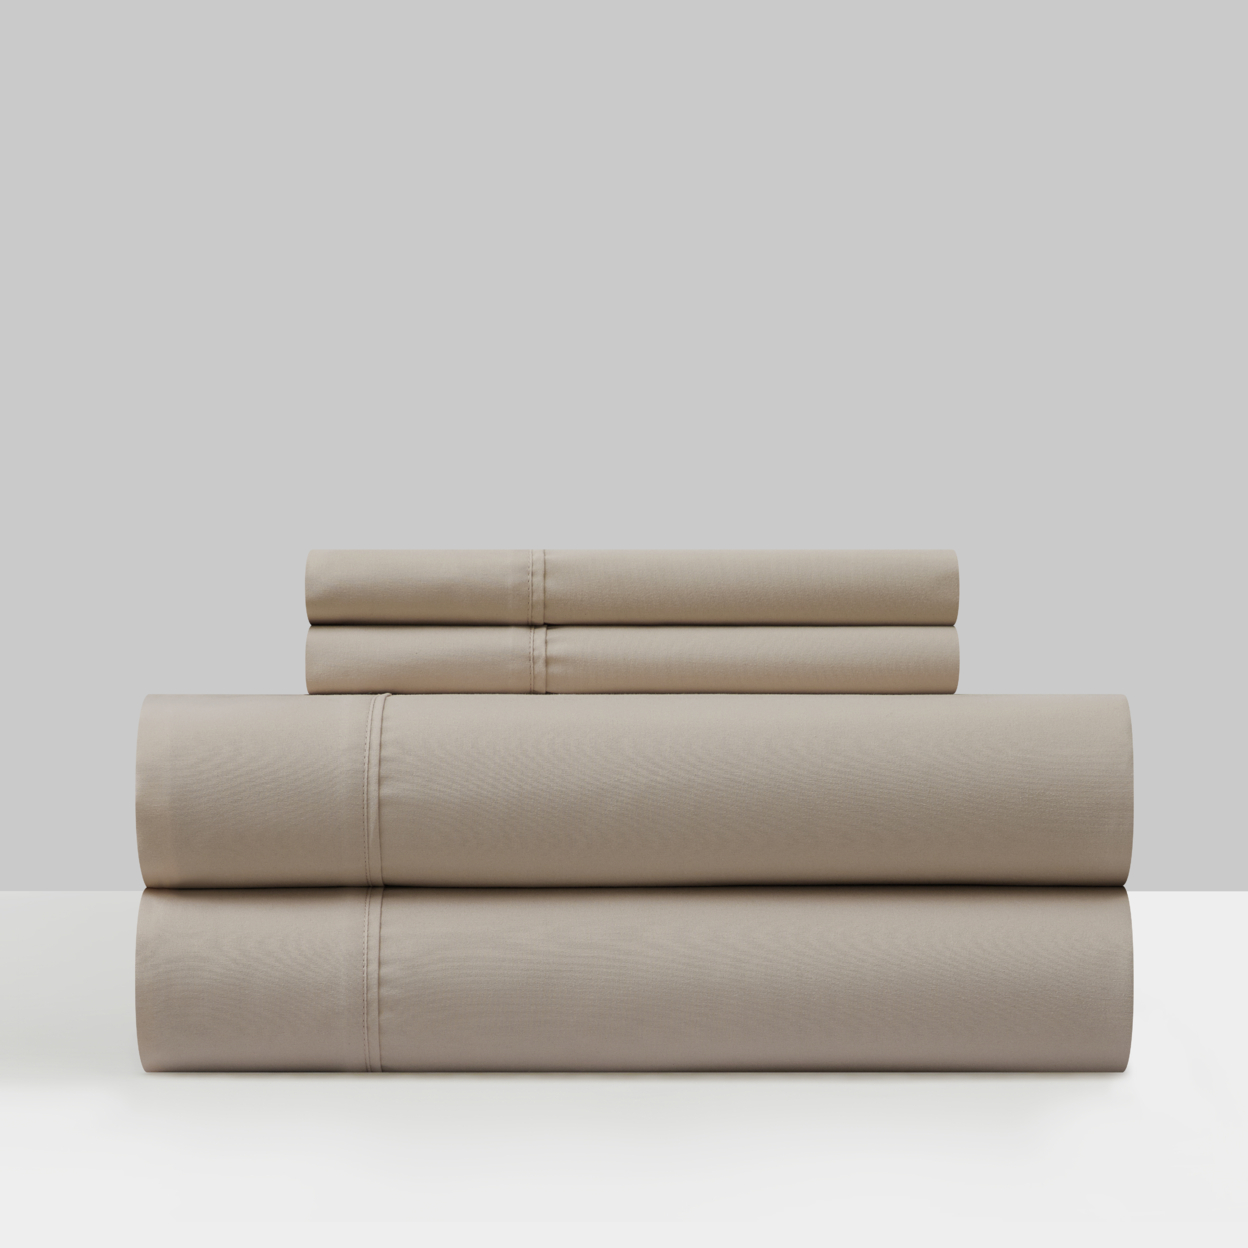 Shton 3 Or 4 Piece Sheet Set Super Soft Solid Color With Piping Flange Edge - Taupe, Twin